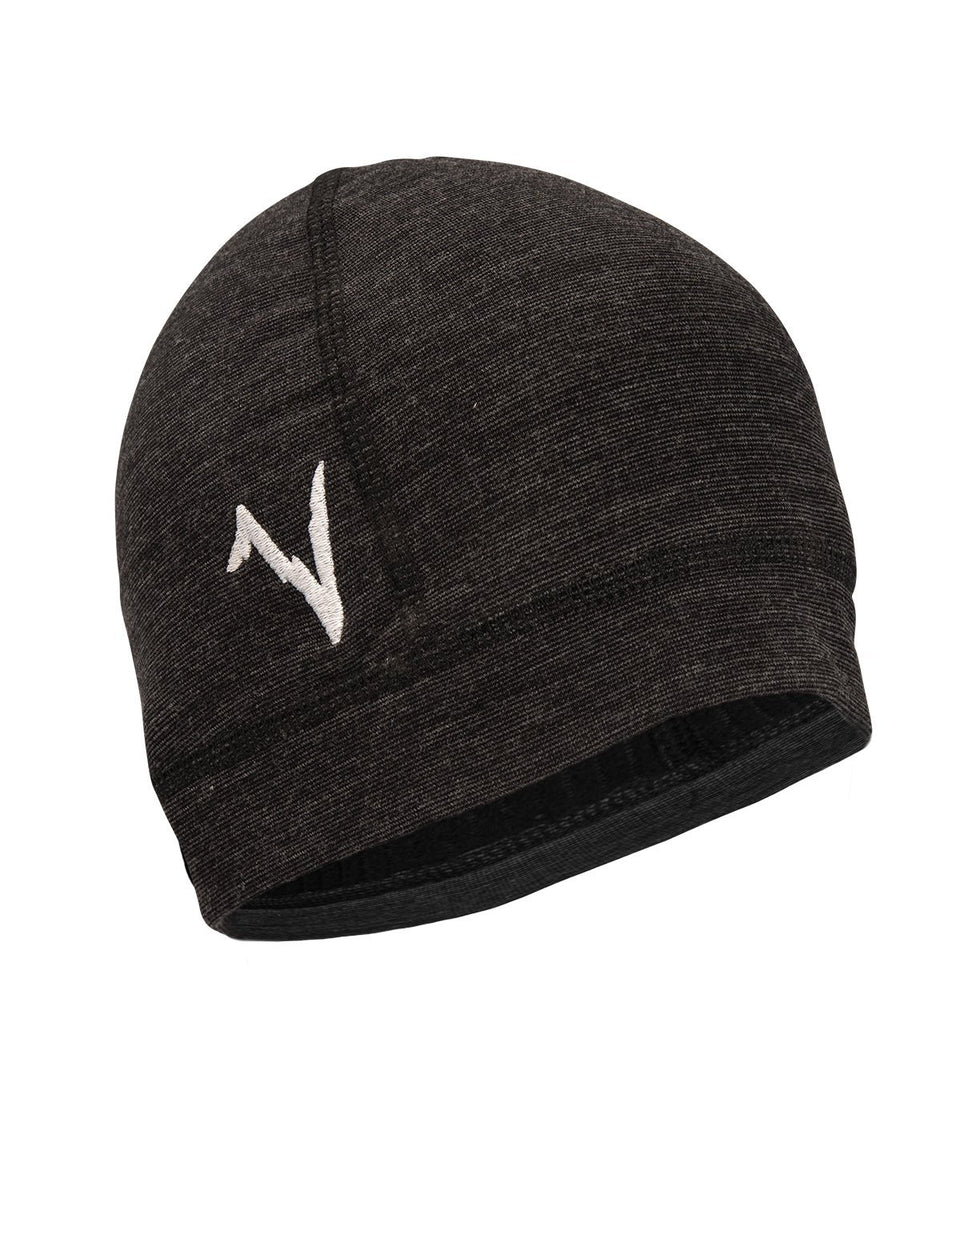 Precision Blended Beanie (Wool)